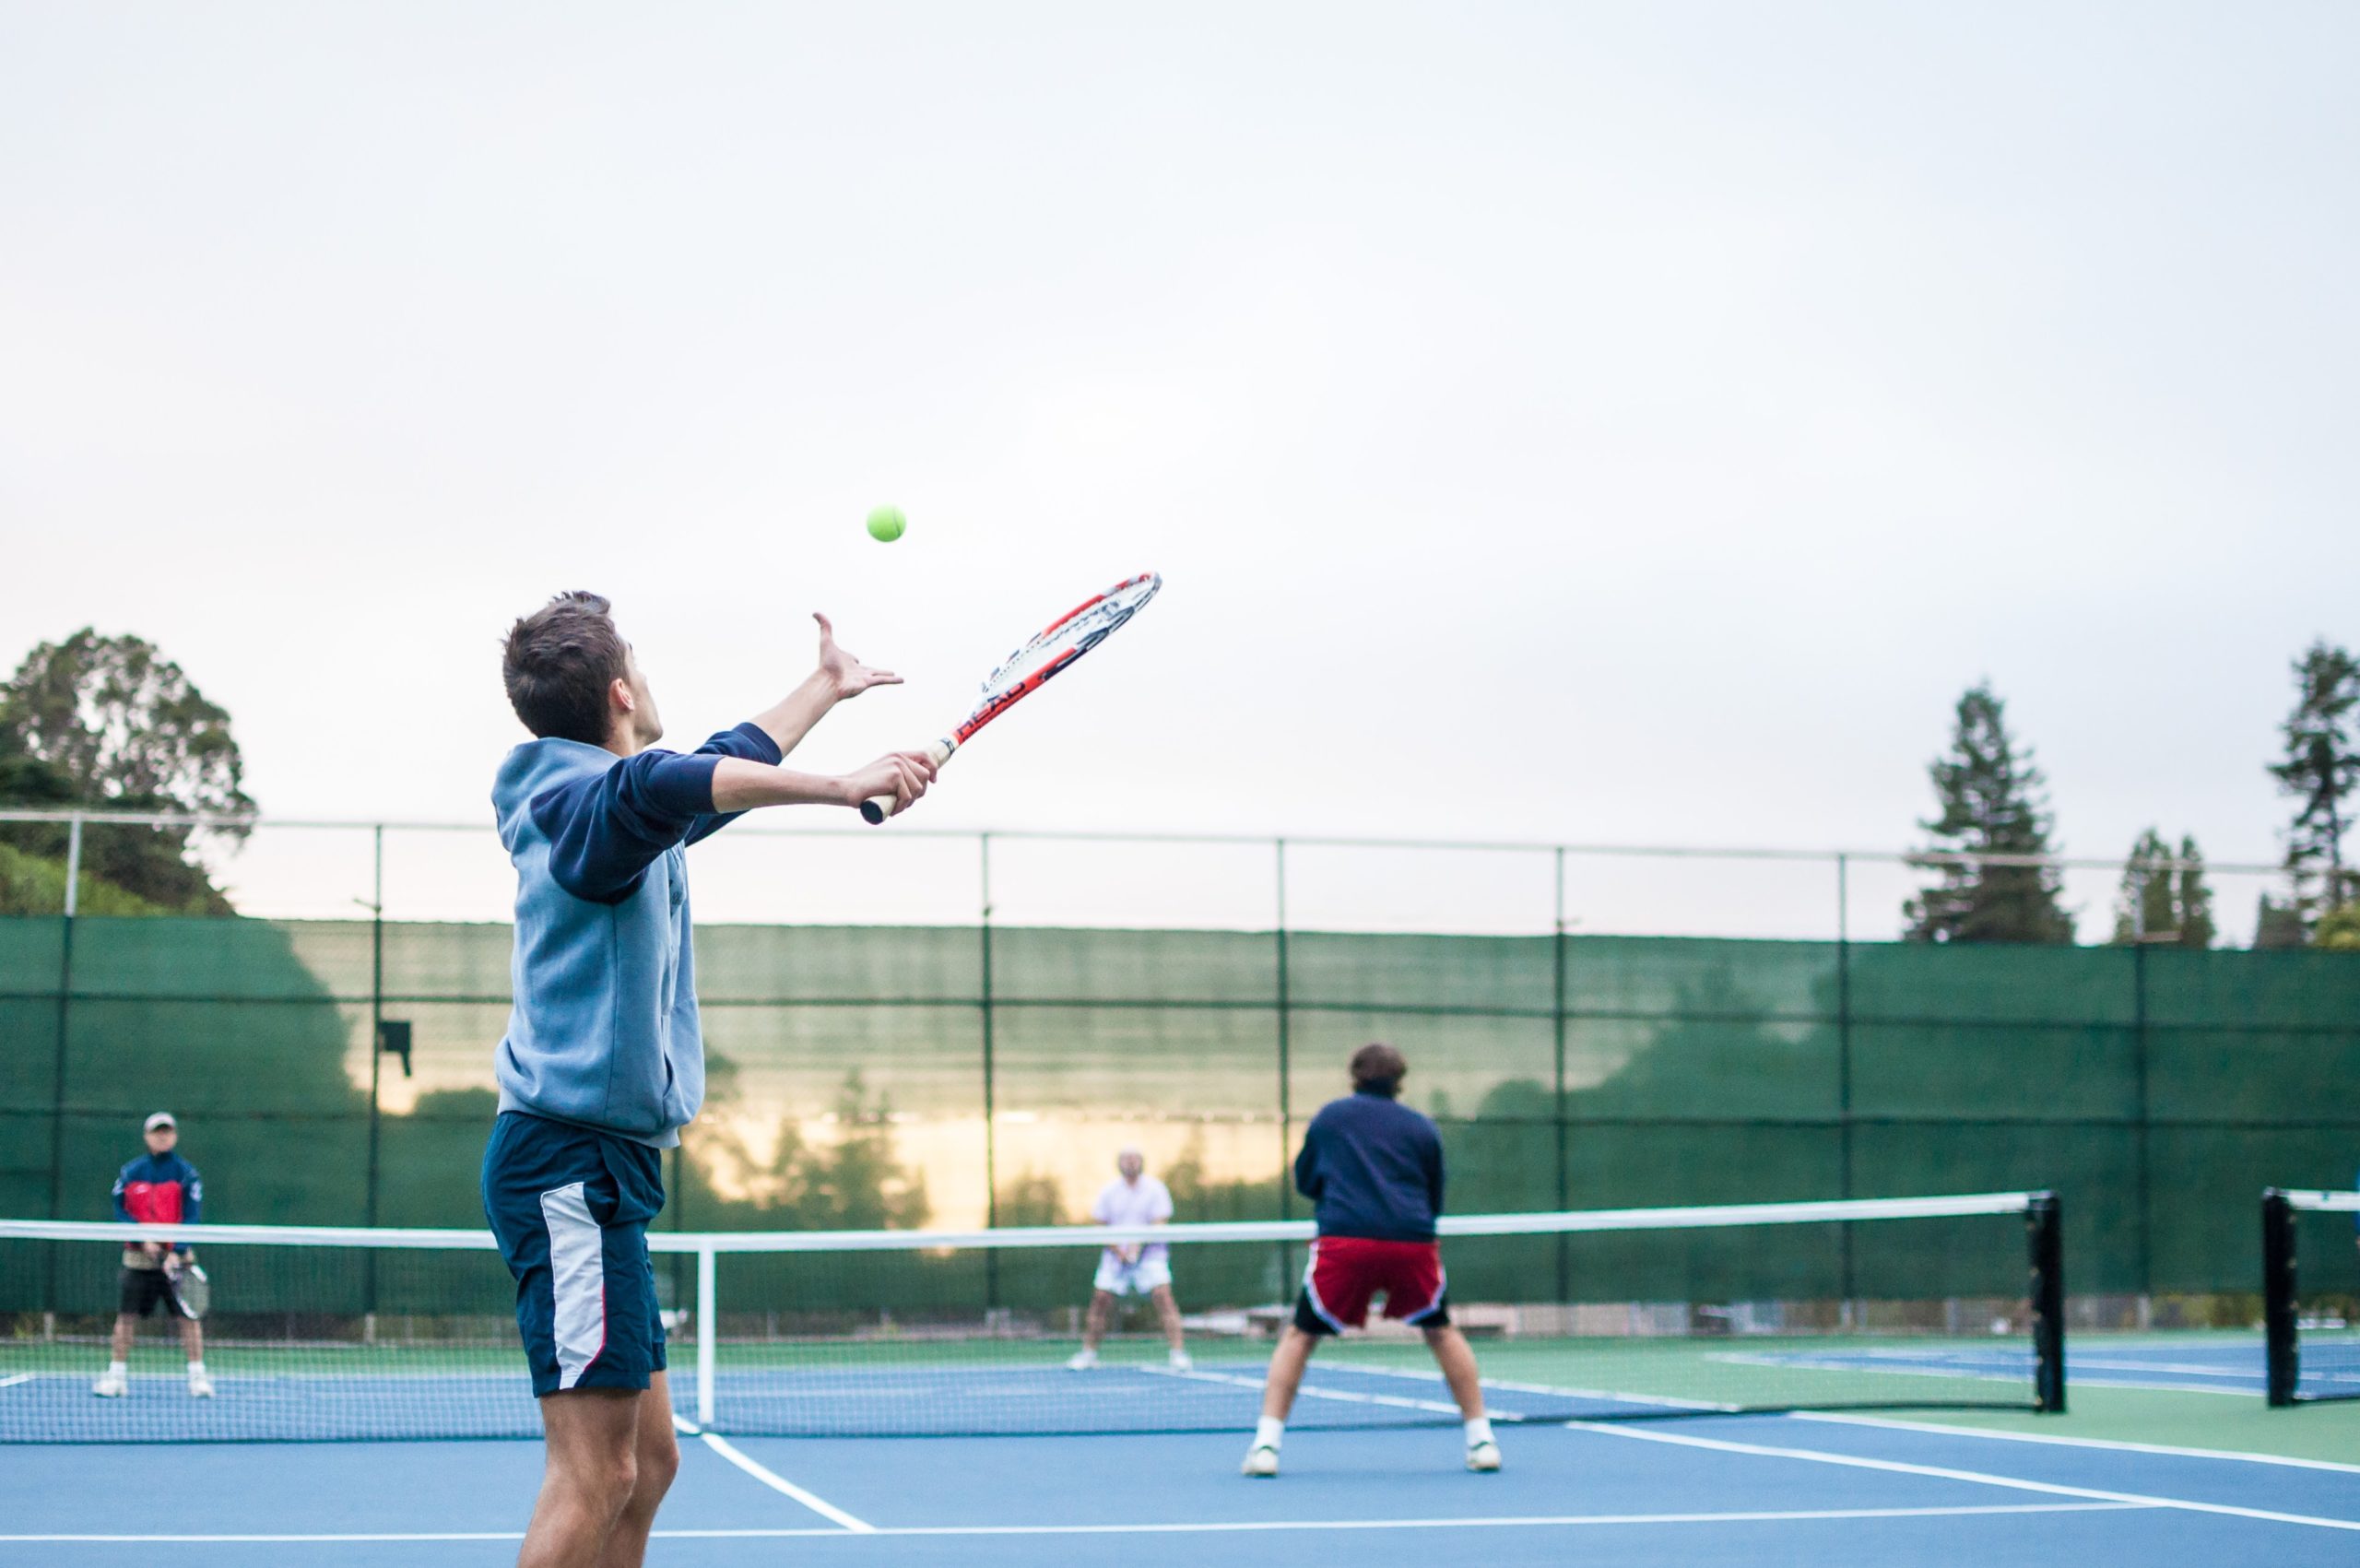 How to avoid or manage tennis elbow